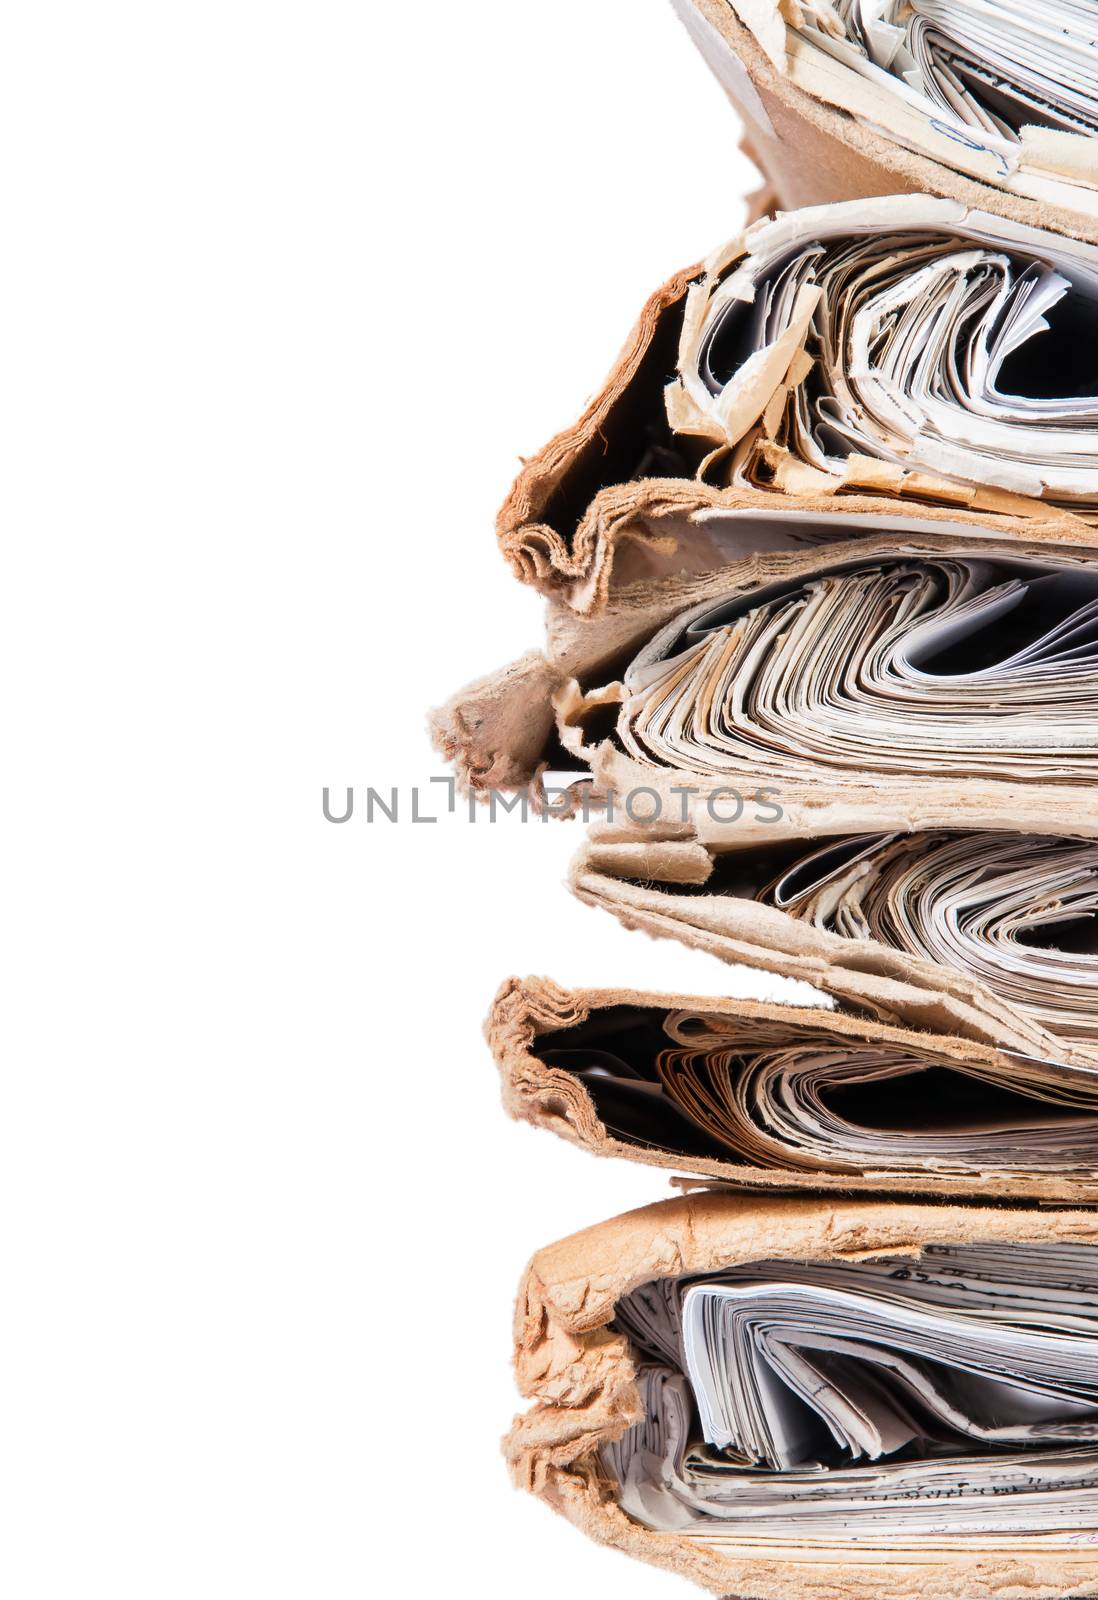 Old Covers Files Arranged In Chaotic Stack by Cipariss